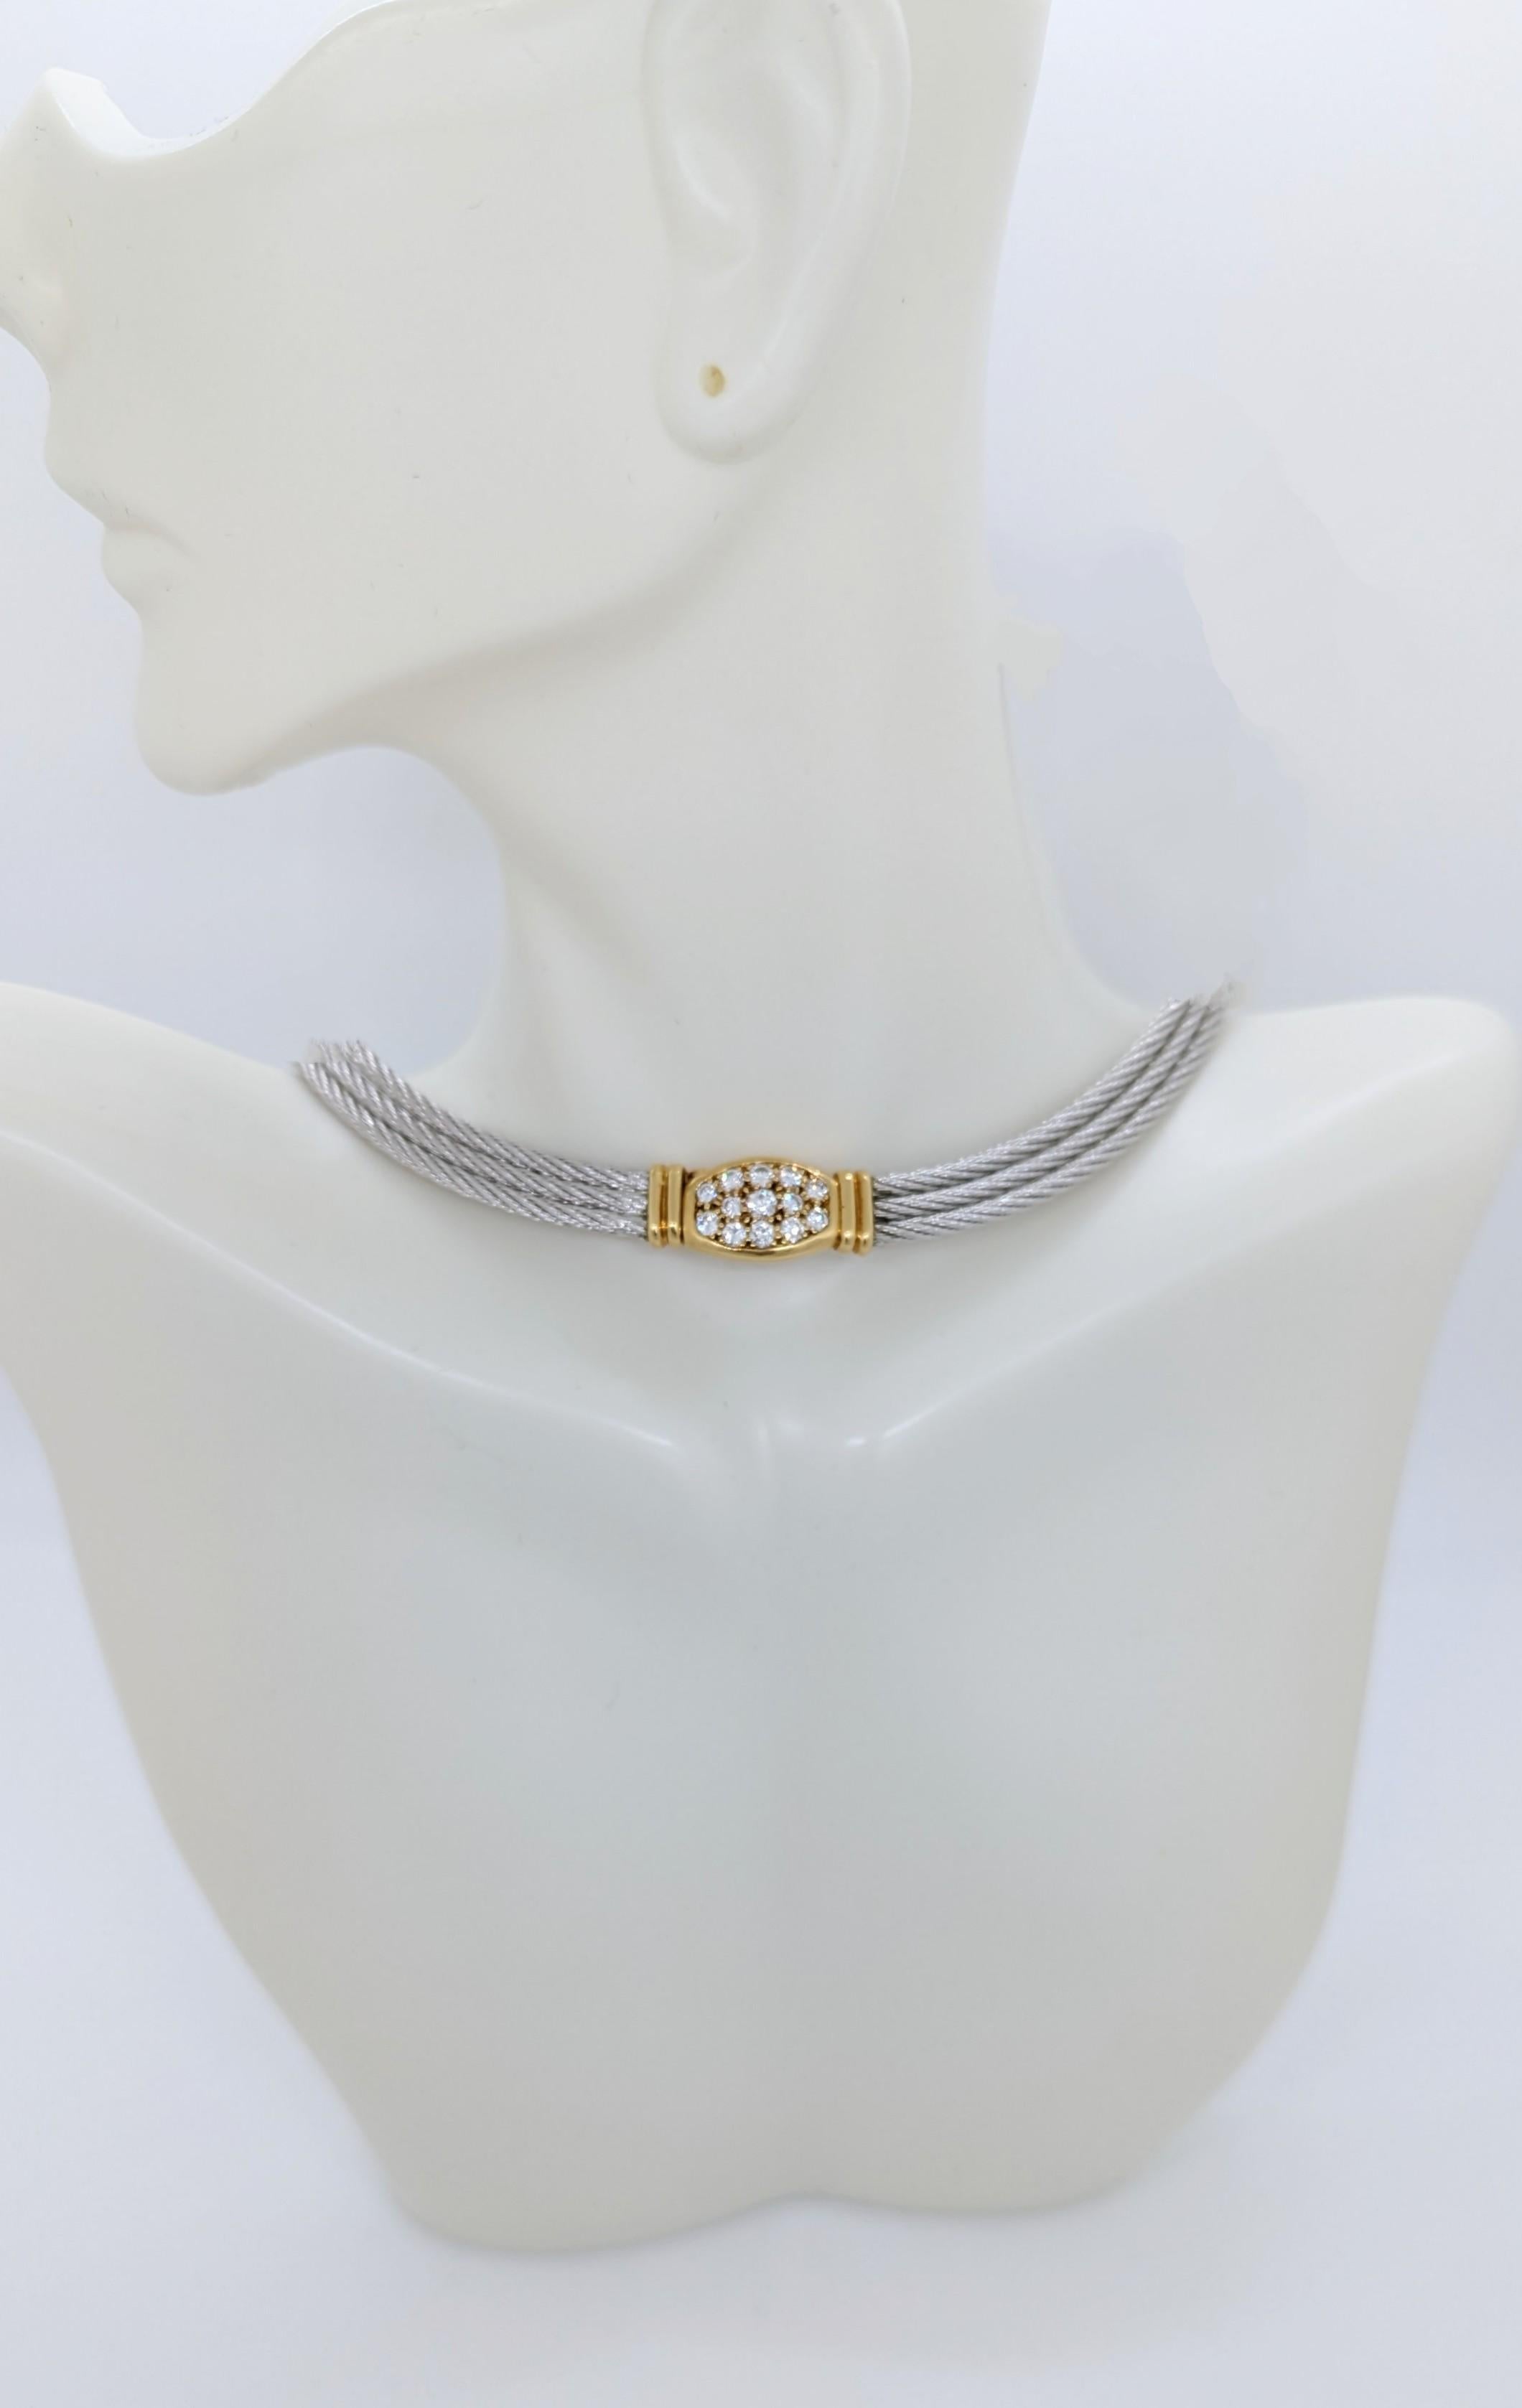 Beautiful estate Fred of Paris necklace with 1.00 ct. of good quality white diamond rounds.  Handmade in steel and 18k yellow gold.  About 13